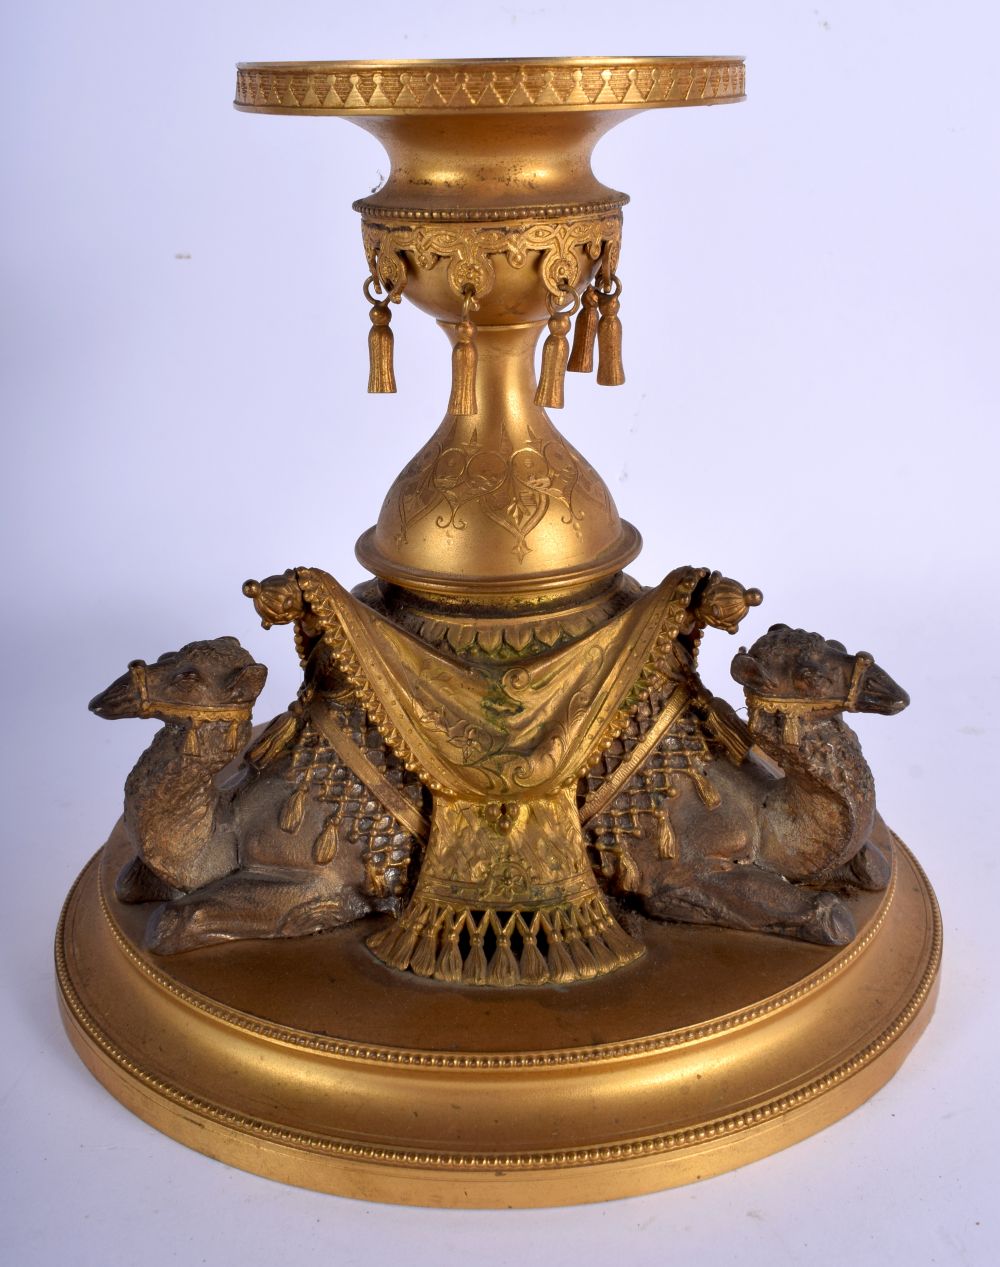 A LATE 19TH CENTURY FRENCH EGYPTIAN REVIVAL GILT METAL TABLE CENTREPIECE formed with recumbent camel